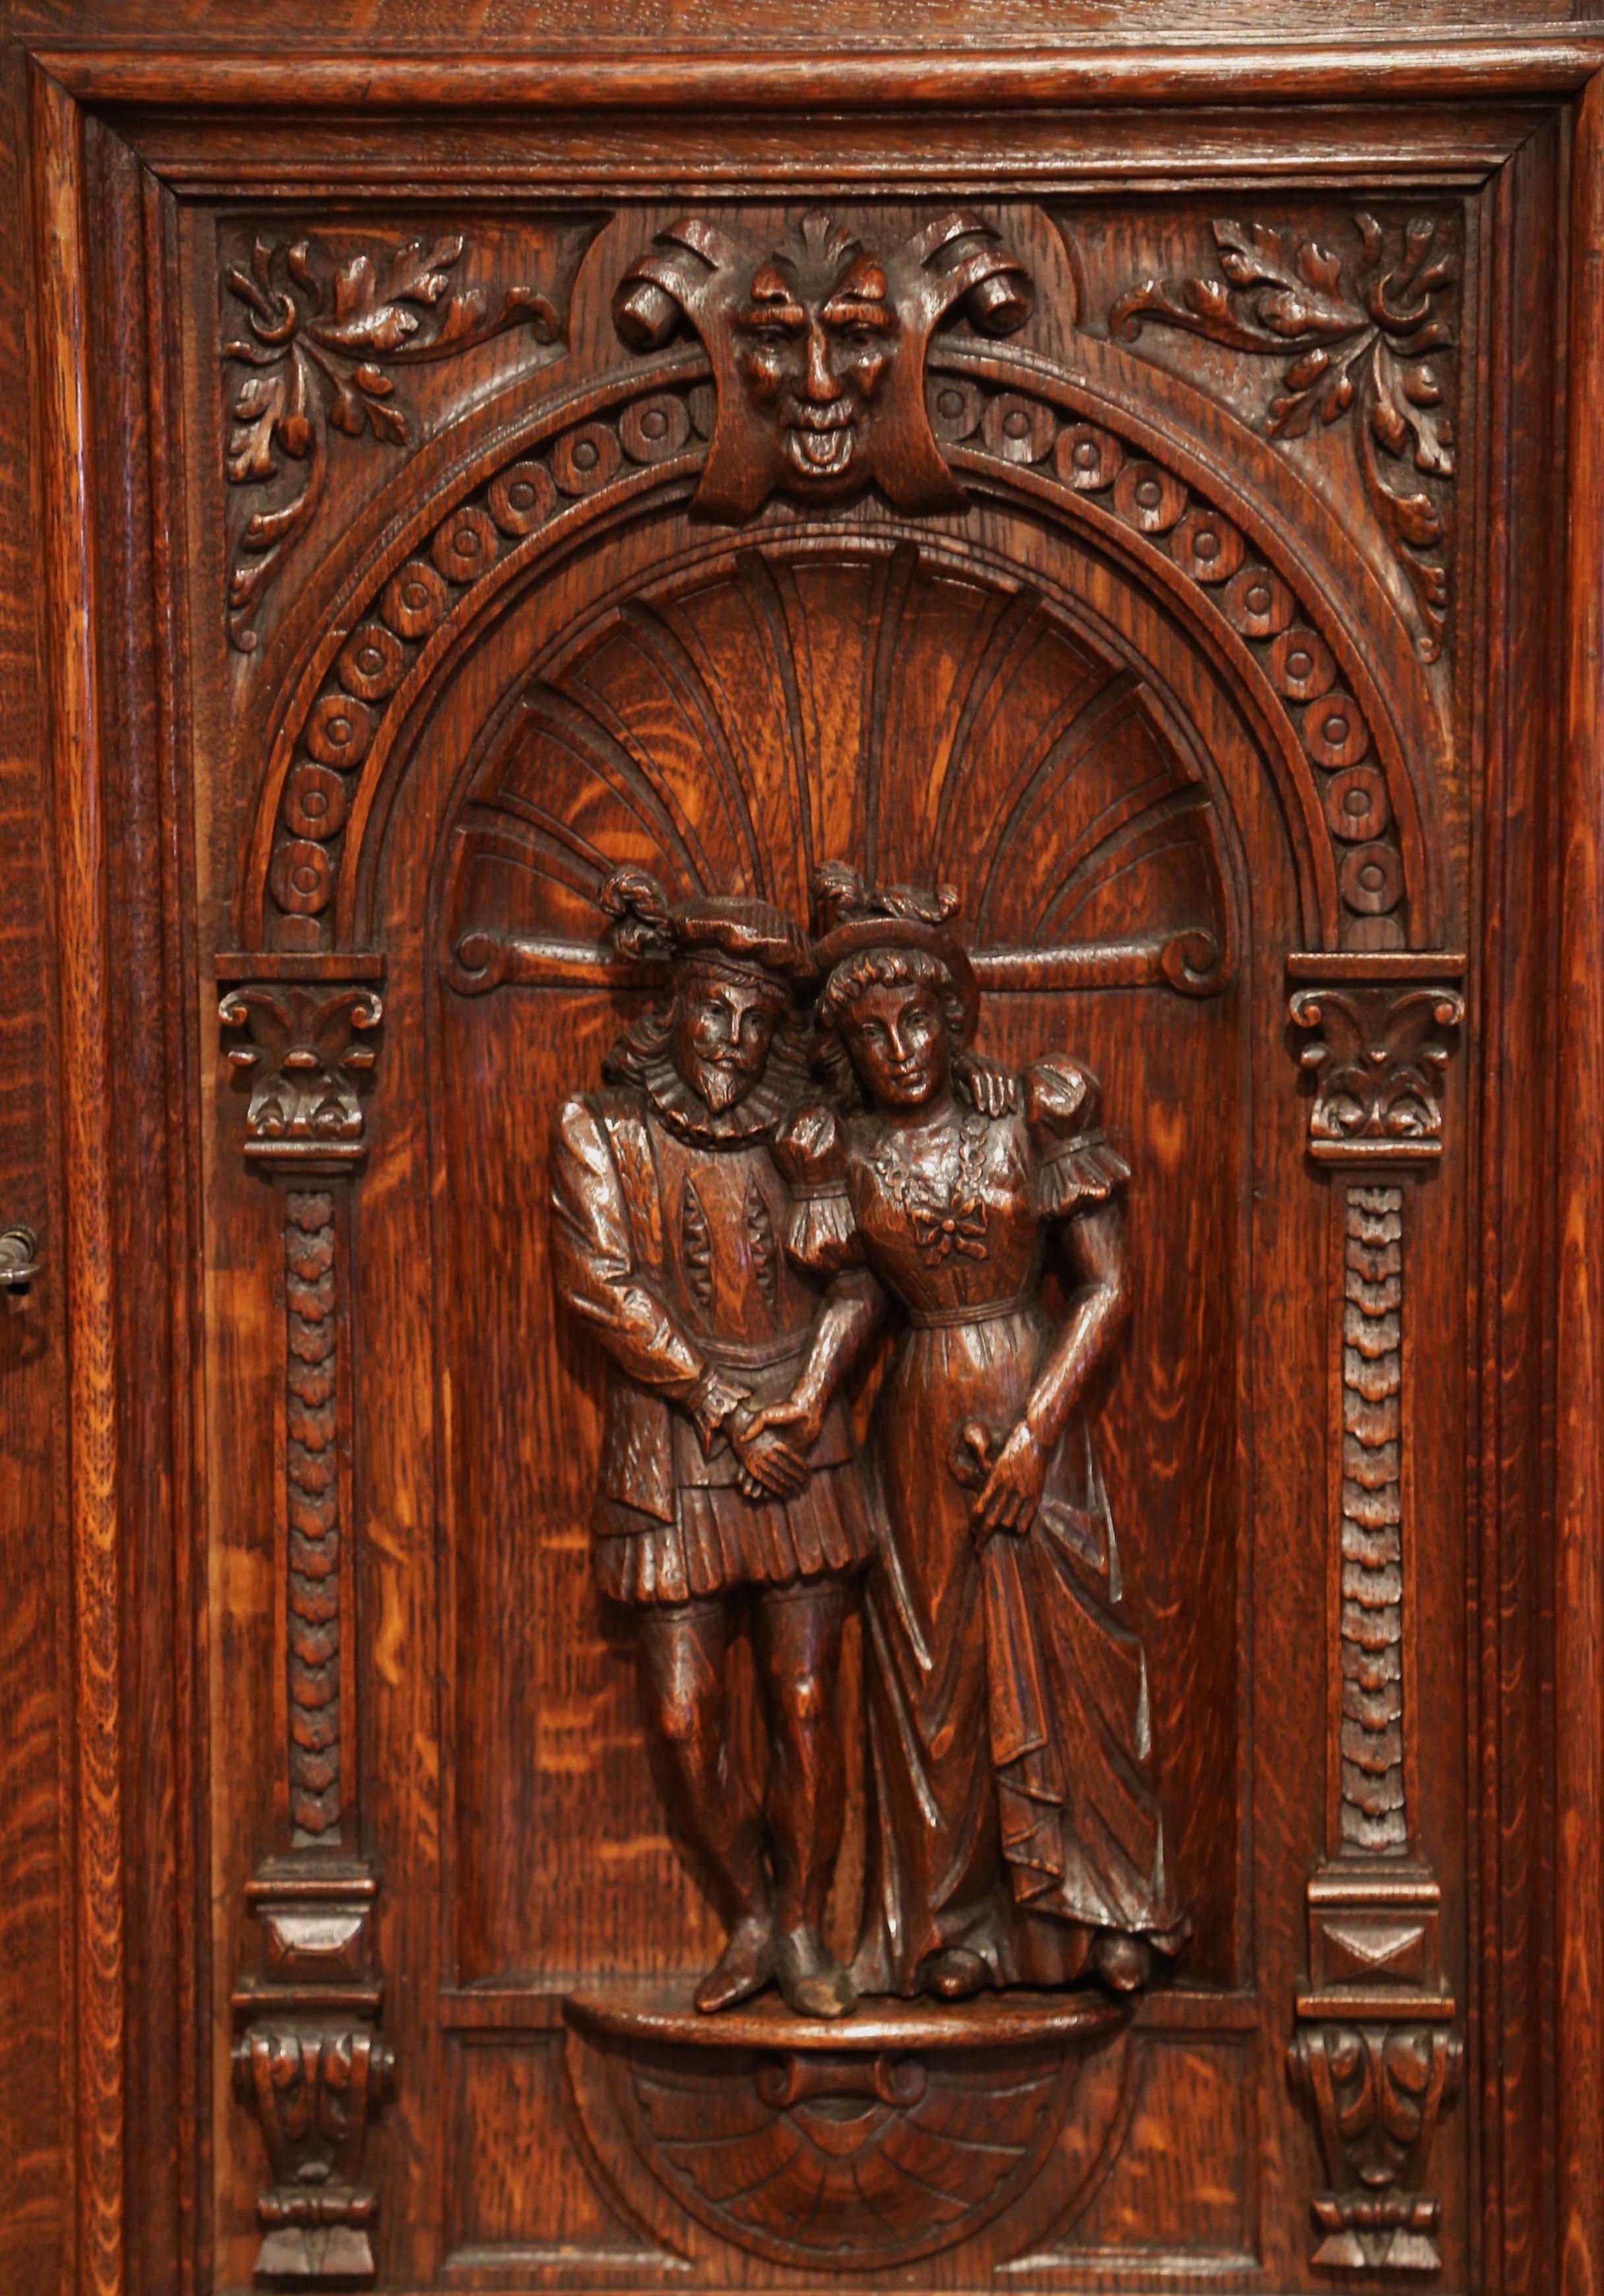 Carved in France, circa 1860, this carved, oak cabinet door is a versatile piece that could be hung on the wall as a piece of art or used as a built-in cabinet door. The ornate door features exquisite carvings in high relief, which includes a